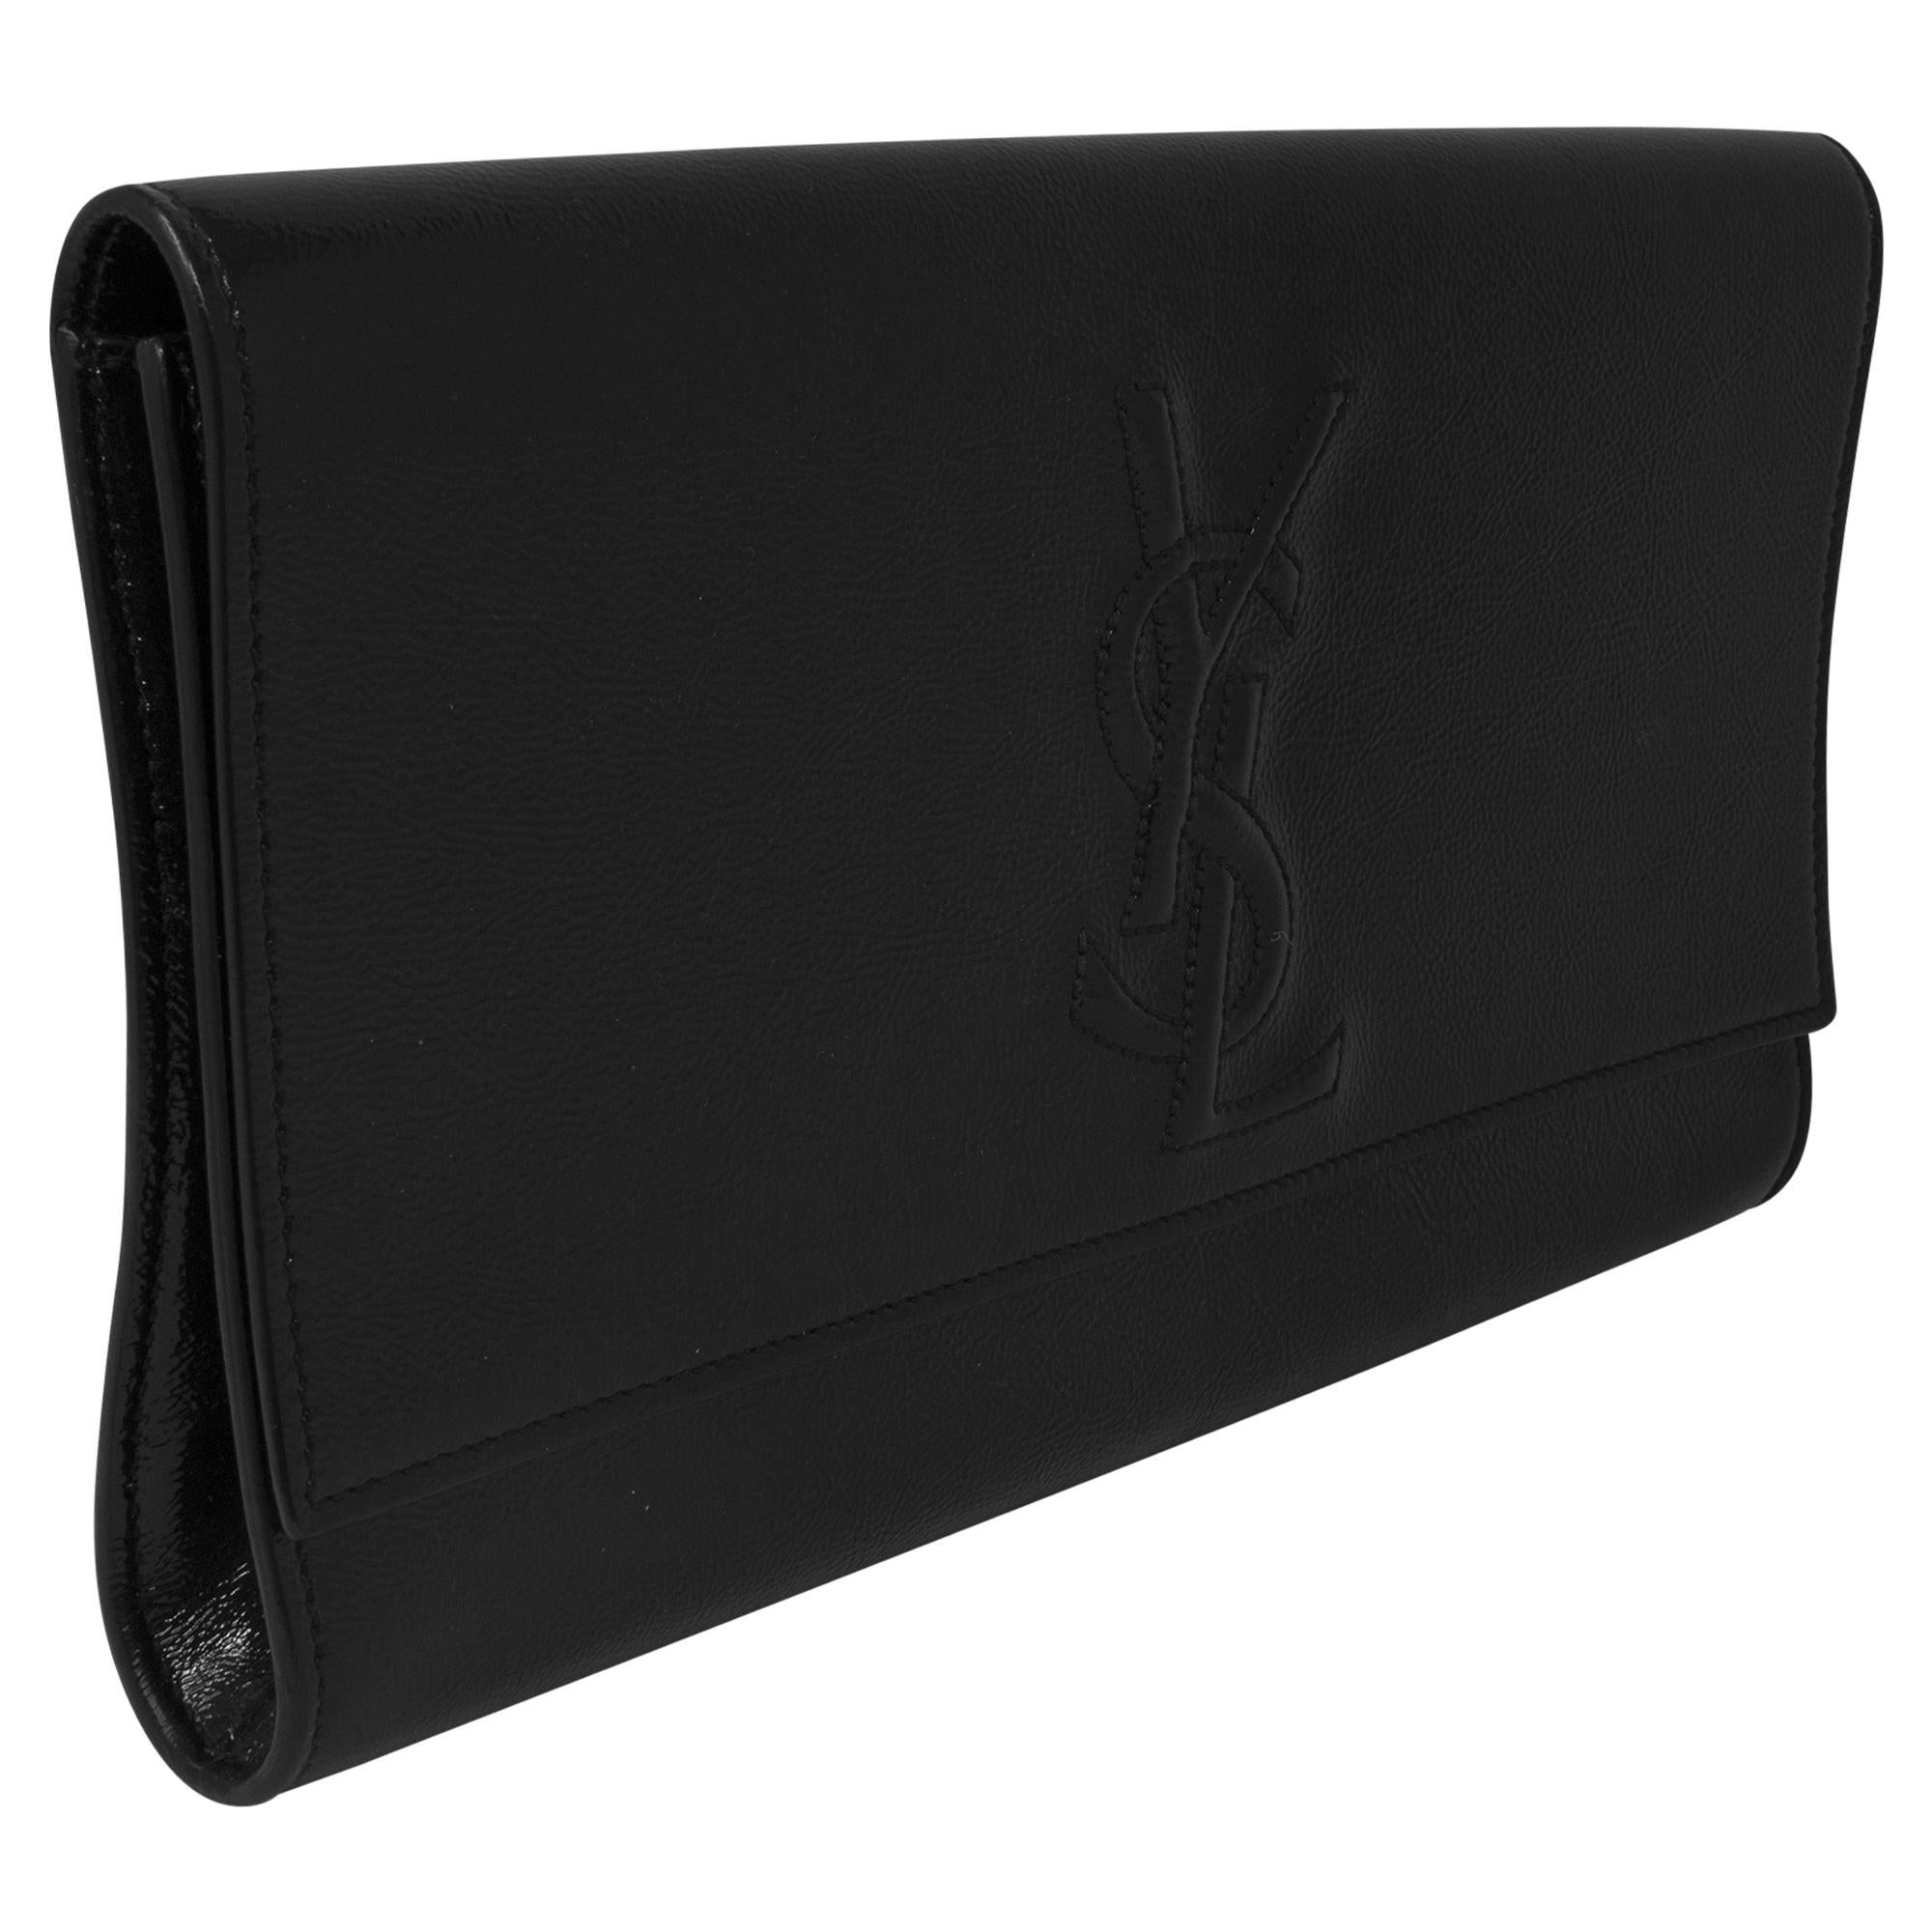 Introducing the Yves Saint Laurent Black Patent Clutch, a sleek and sophisticated accessory for the modern woman. Crafted from luxurious black patent leather, this clutch exudes elegance and timeless style. With its minimalist design and silver